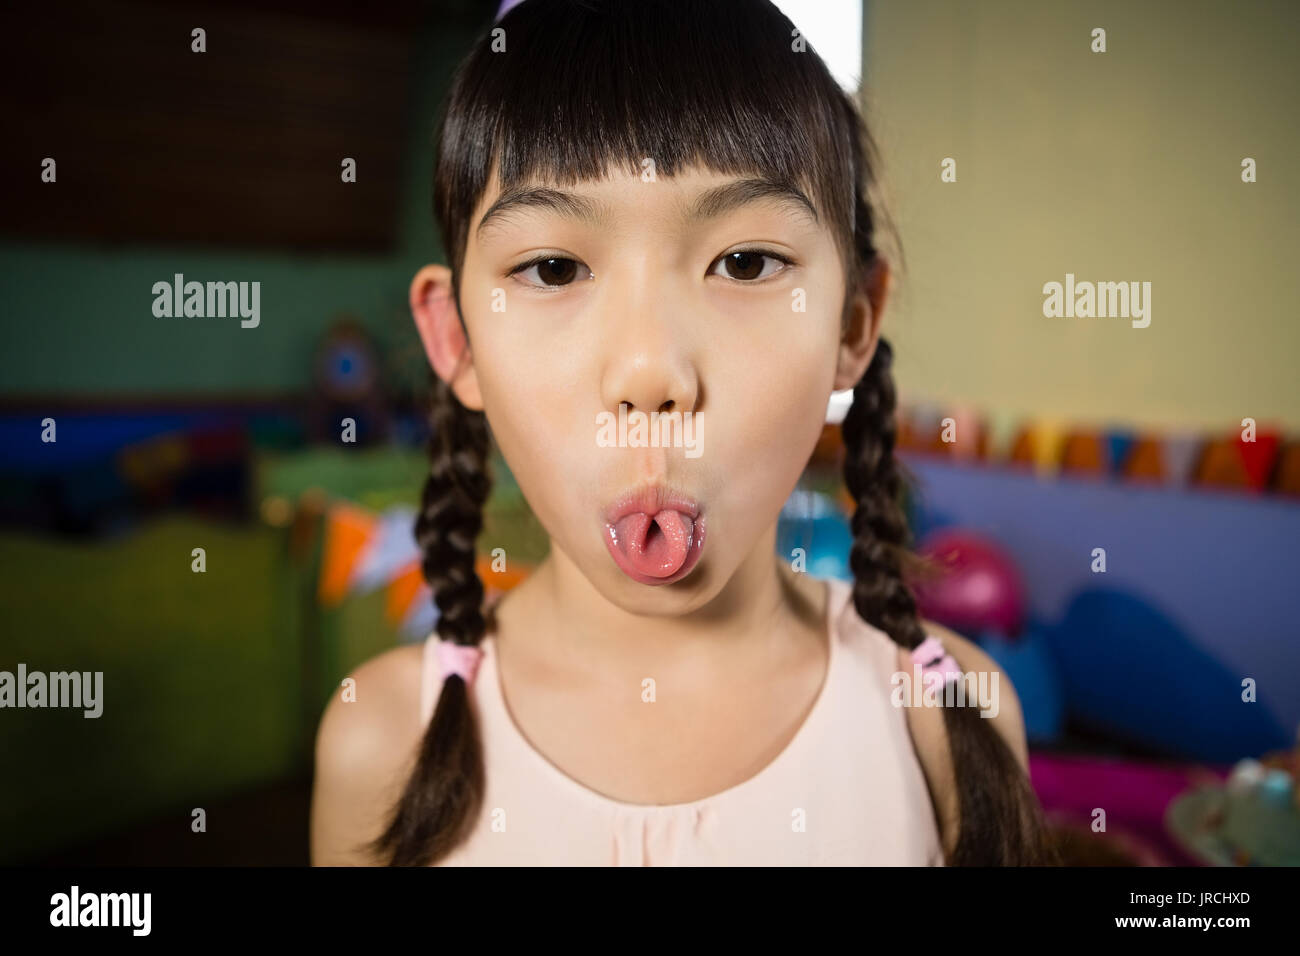 Girl Making Funny Faces High Resolution Stock Photography And Images Alamy